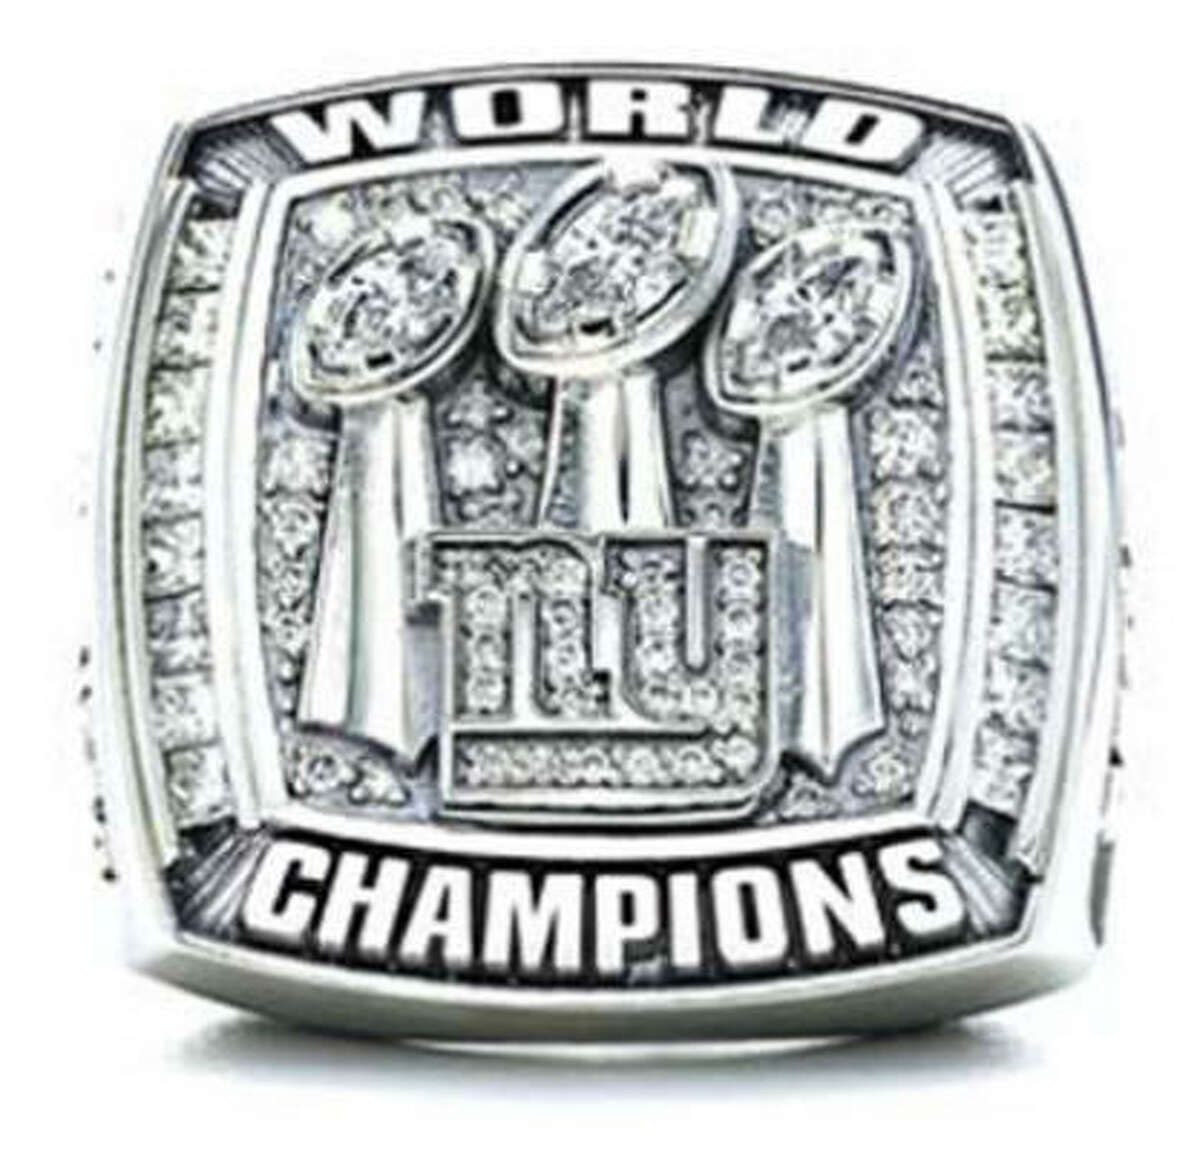 Super Bowl ring design could go to Houston company